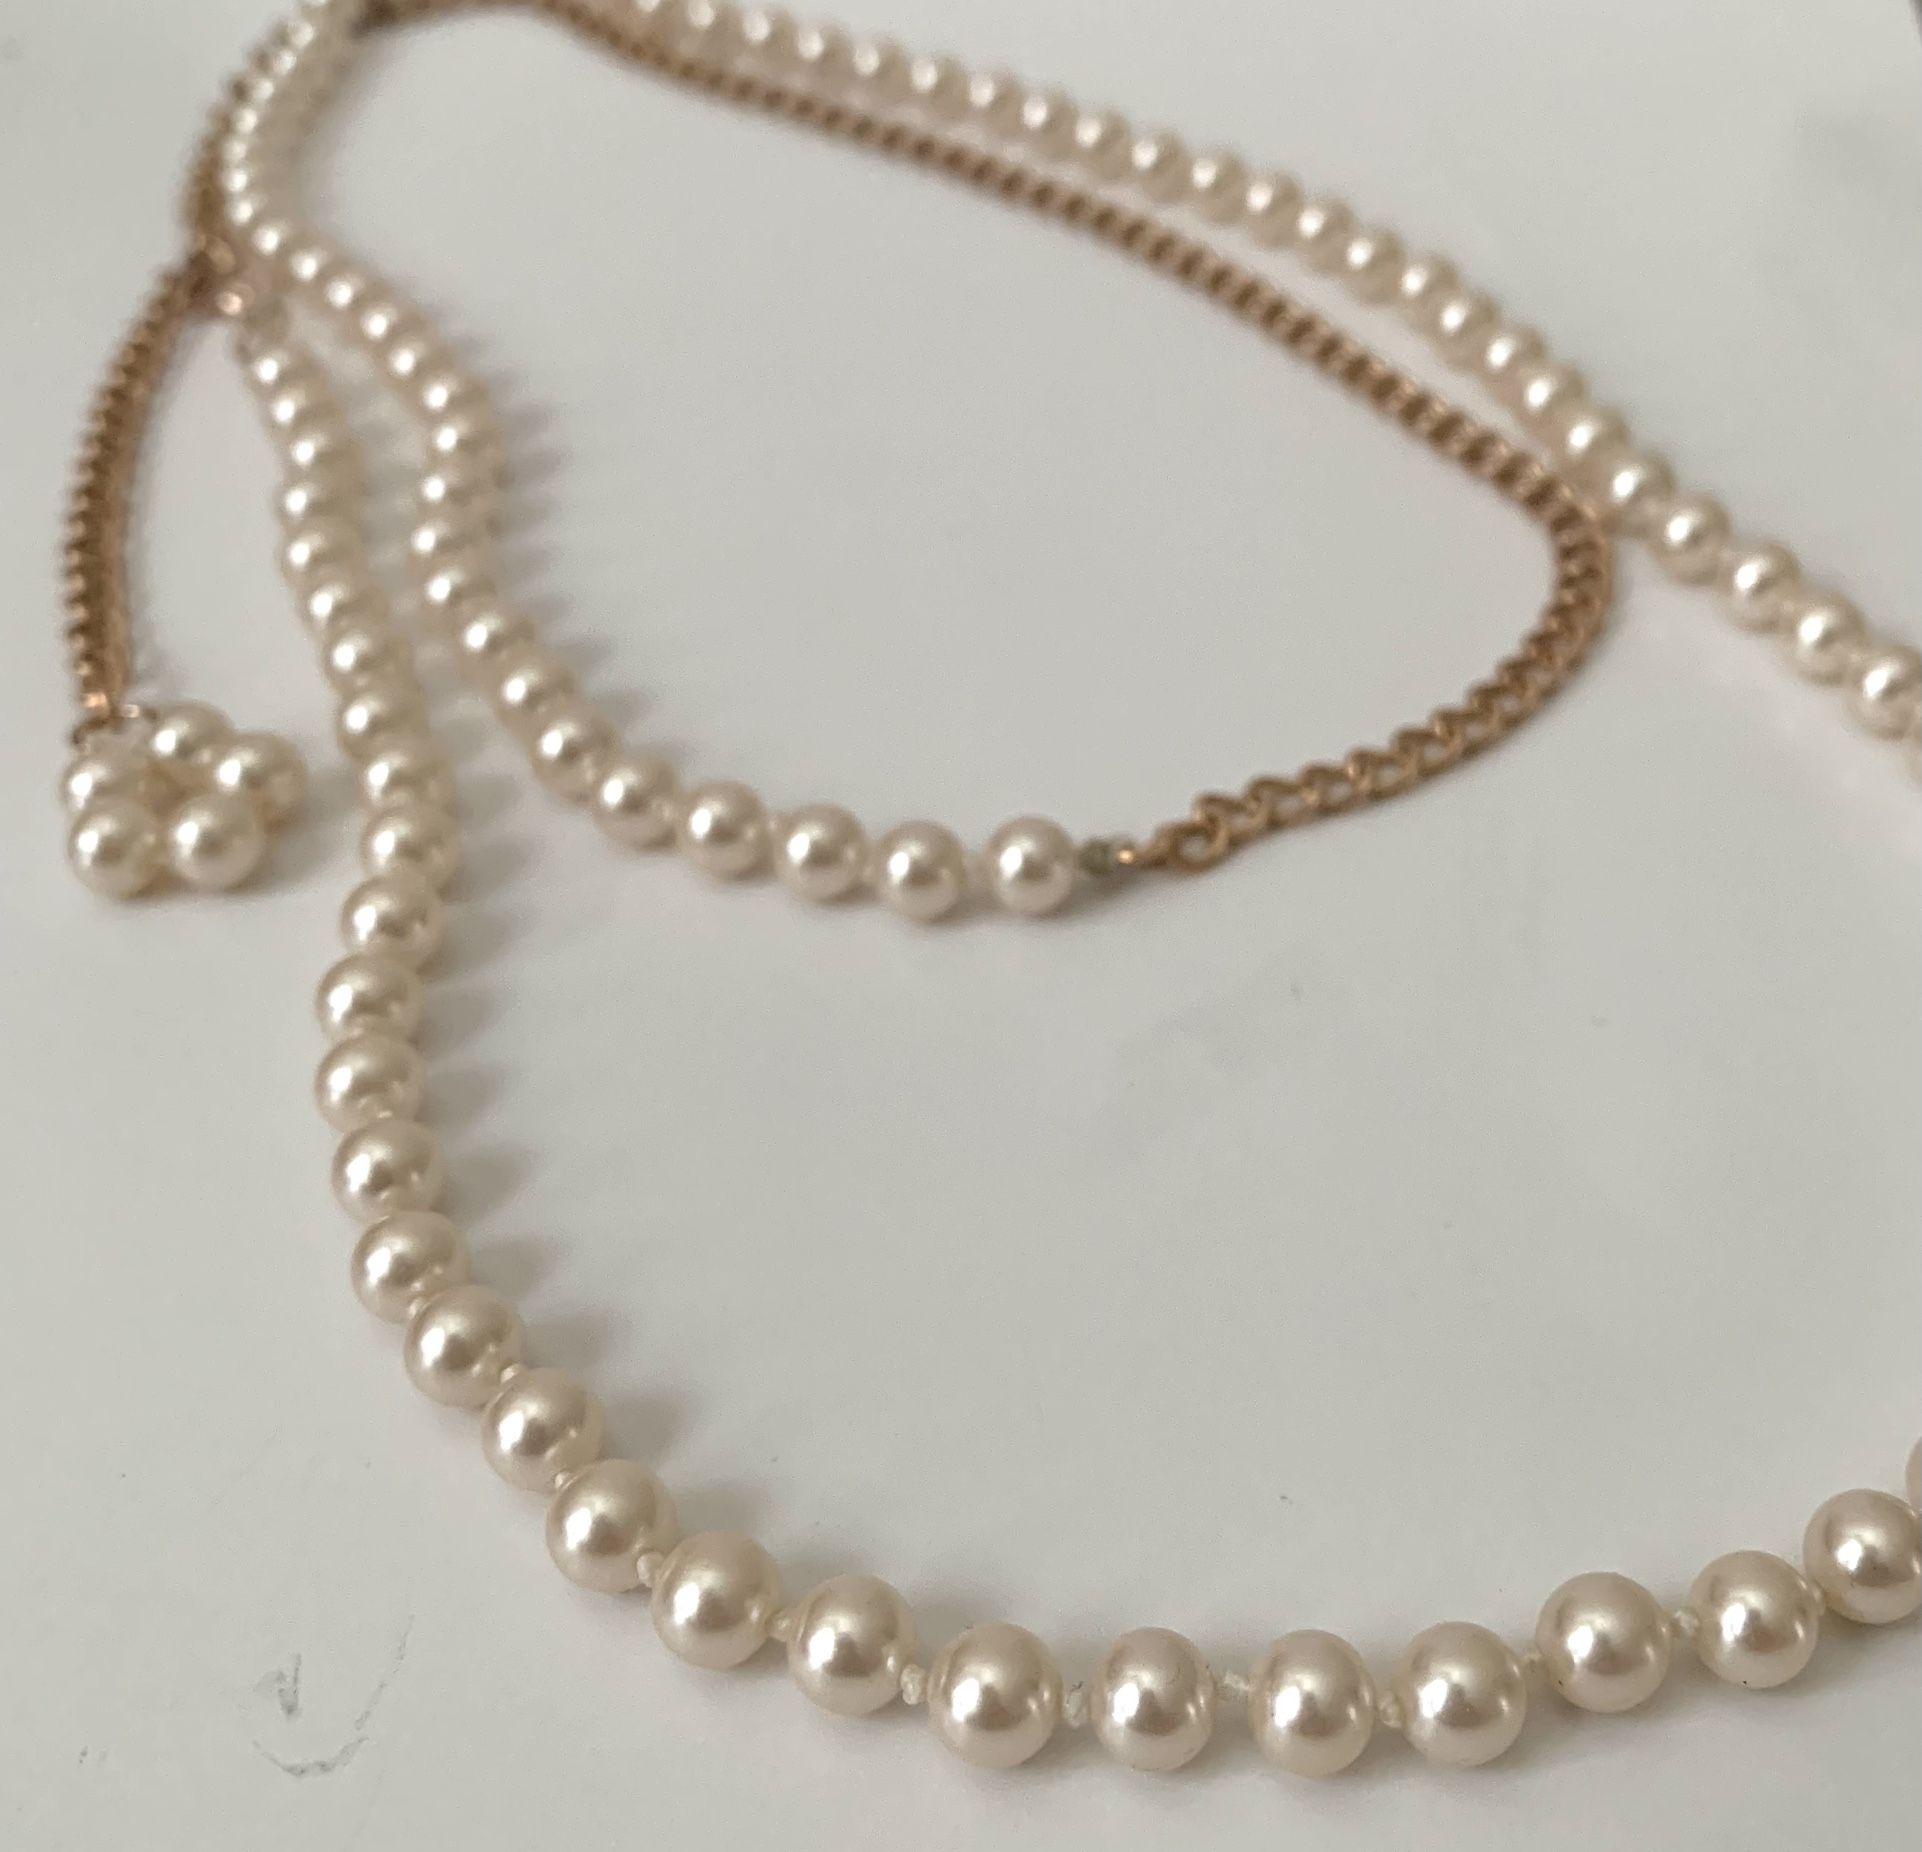 *Convertible* Combined Two Necklaces Into One, Could Be Used For Waist Chain As Well